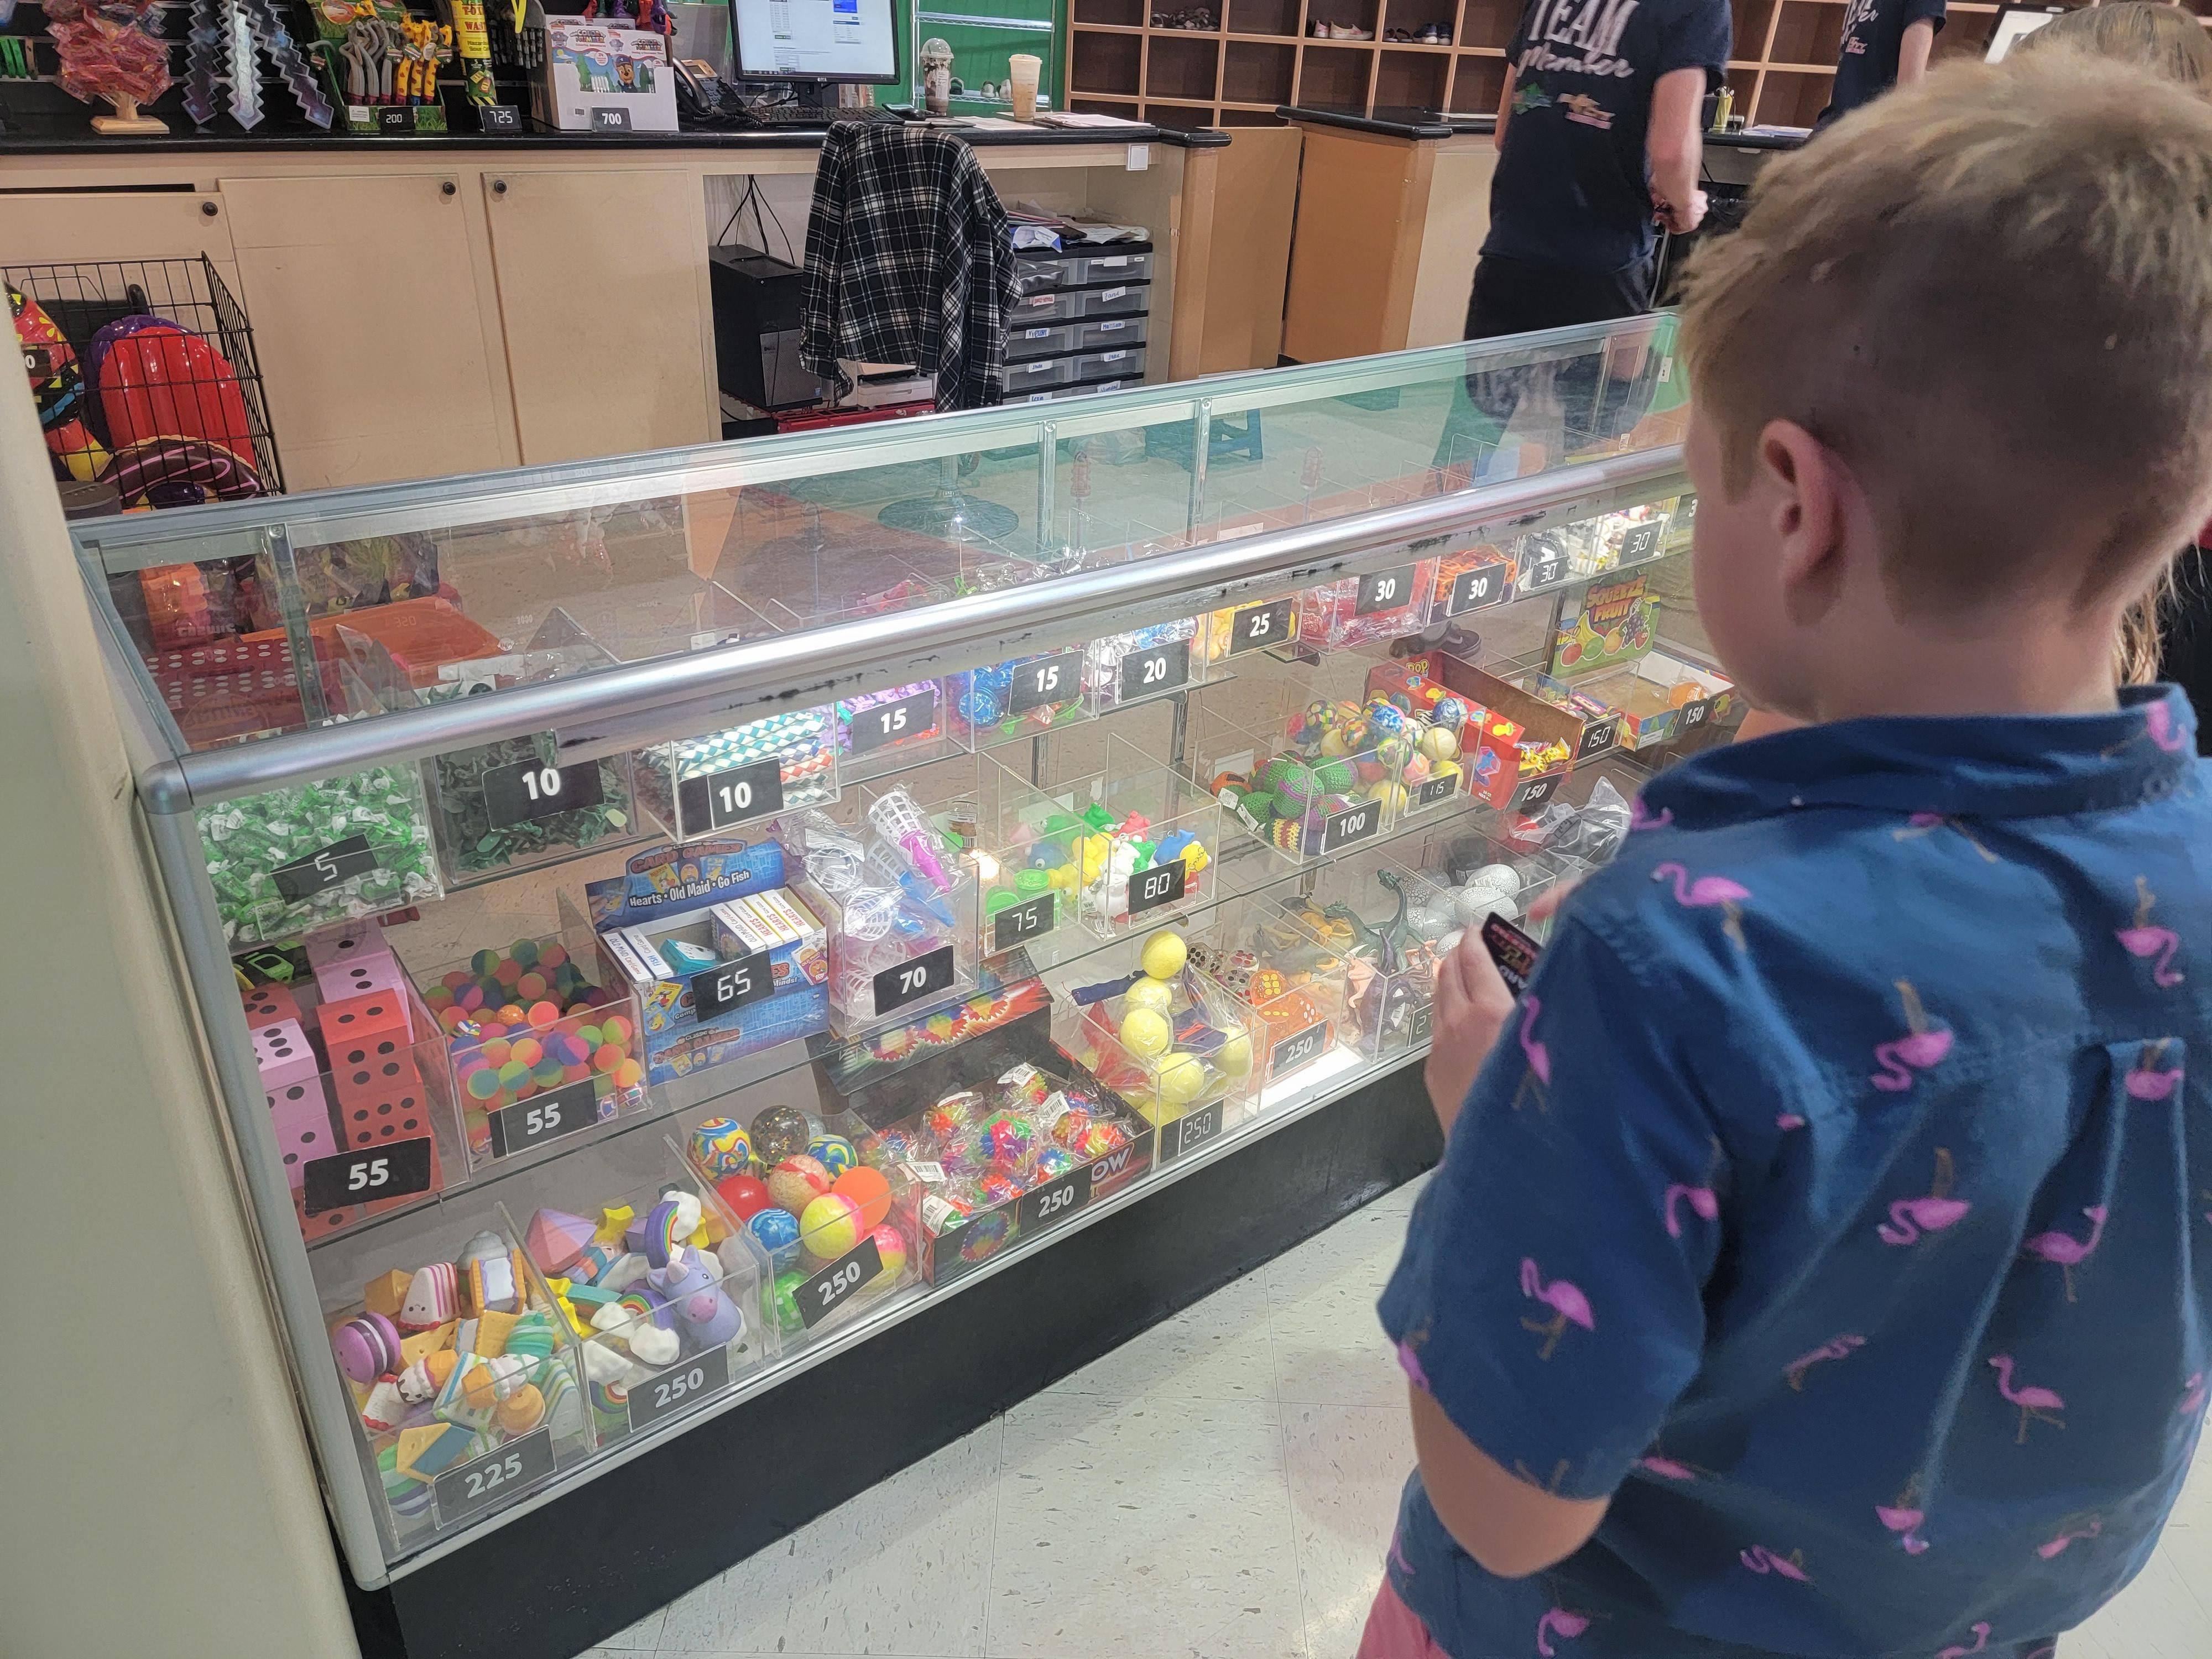 My son puts more thought into how to spend his 46 tokens at the prize counter than most people put into investing their life savings.